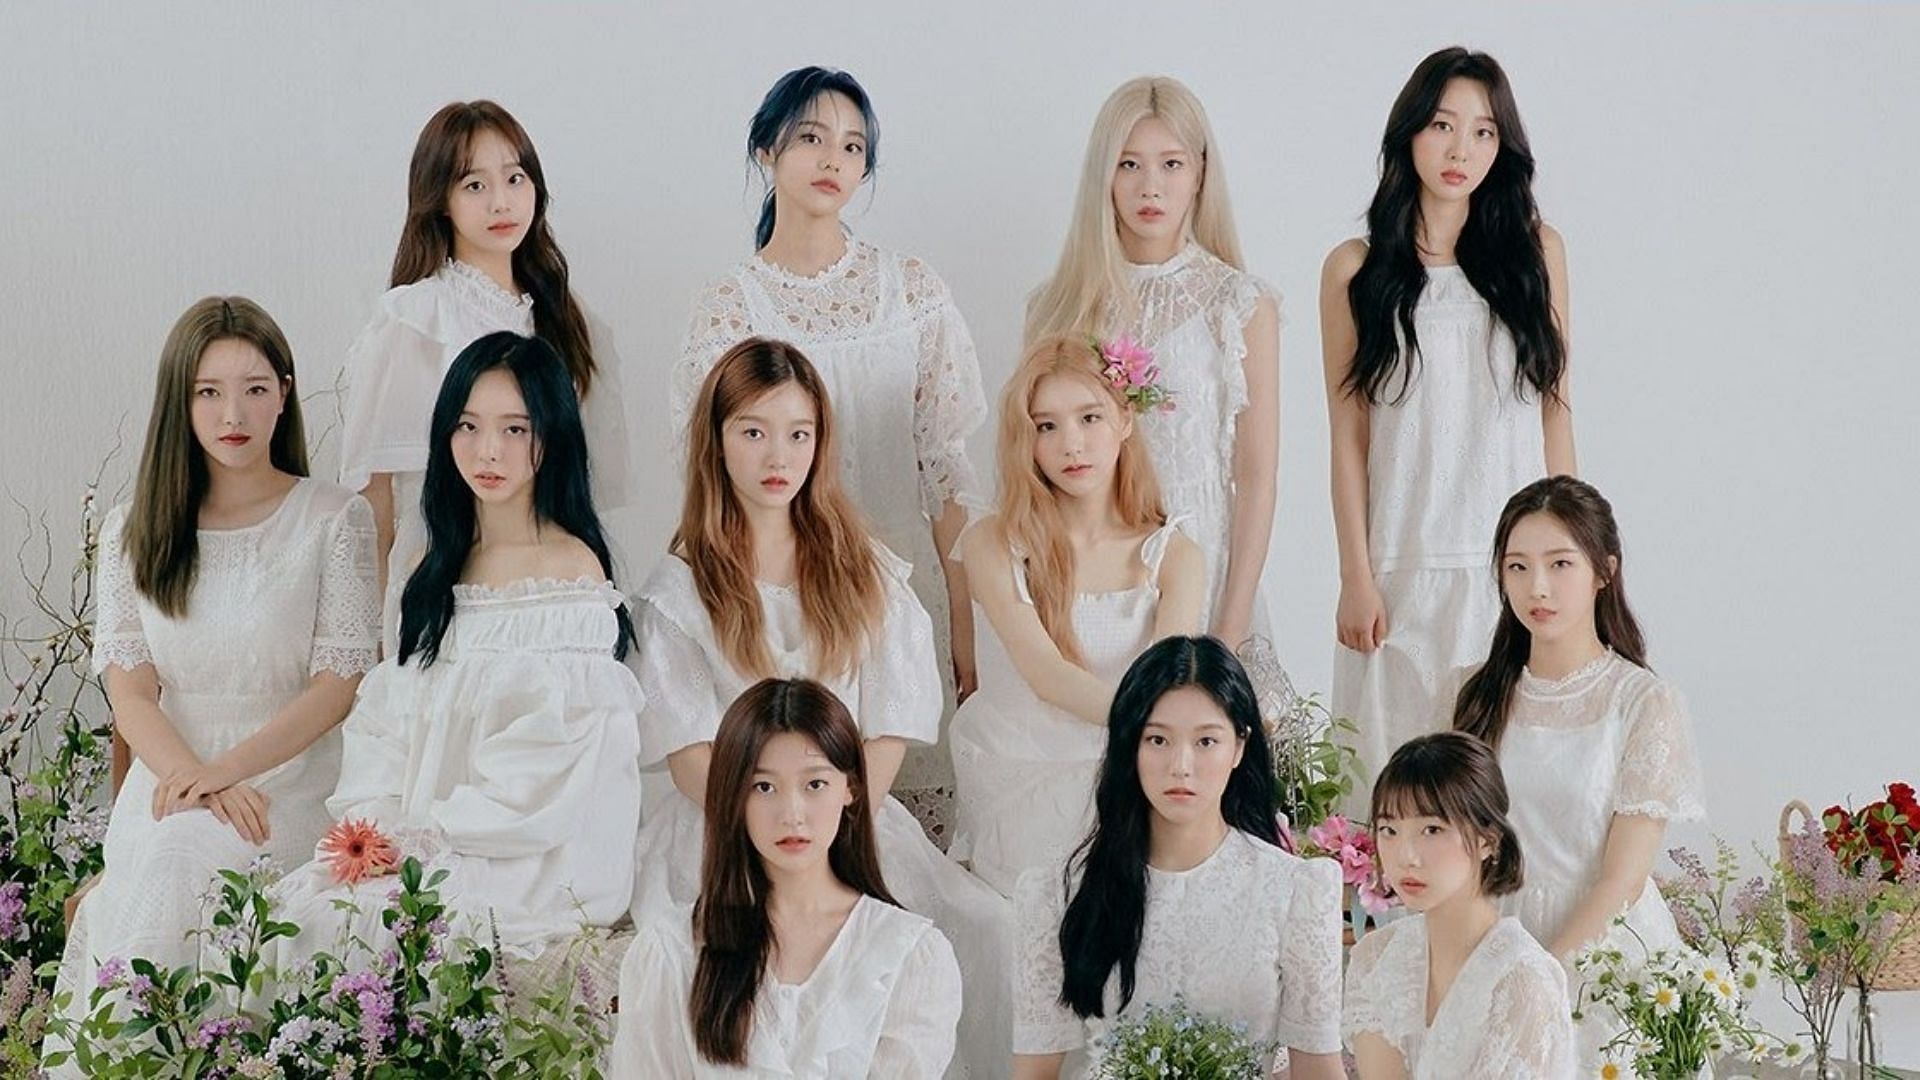 Now free Hyunjin and Vivi!": Fans as nine LOONA members reportedly a lawsuit to suspend their exclusive contracts with BlockBerry Creative